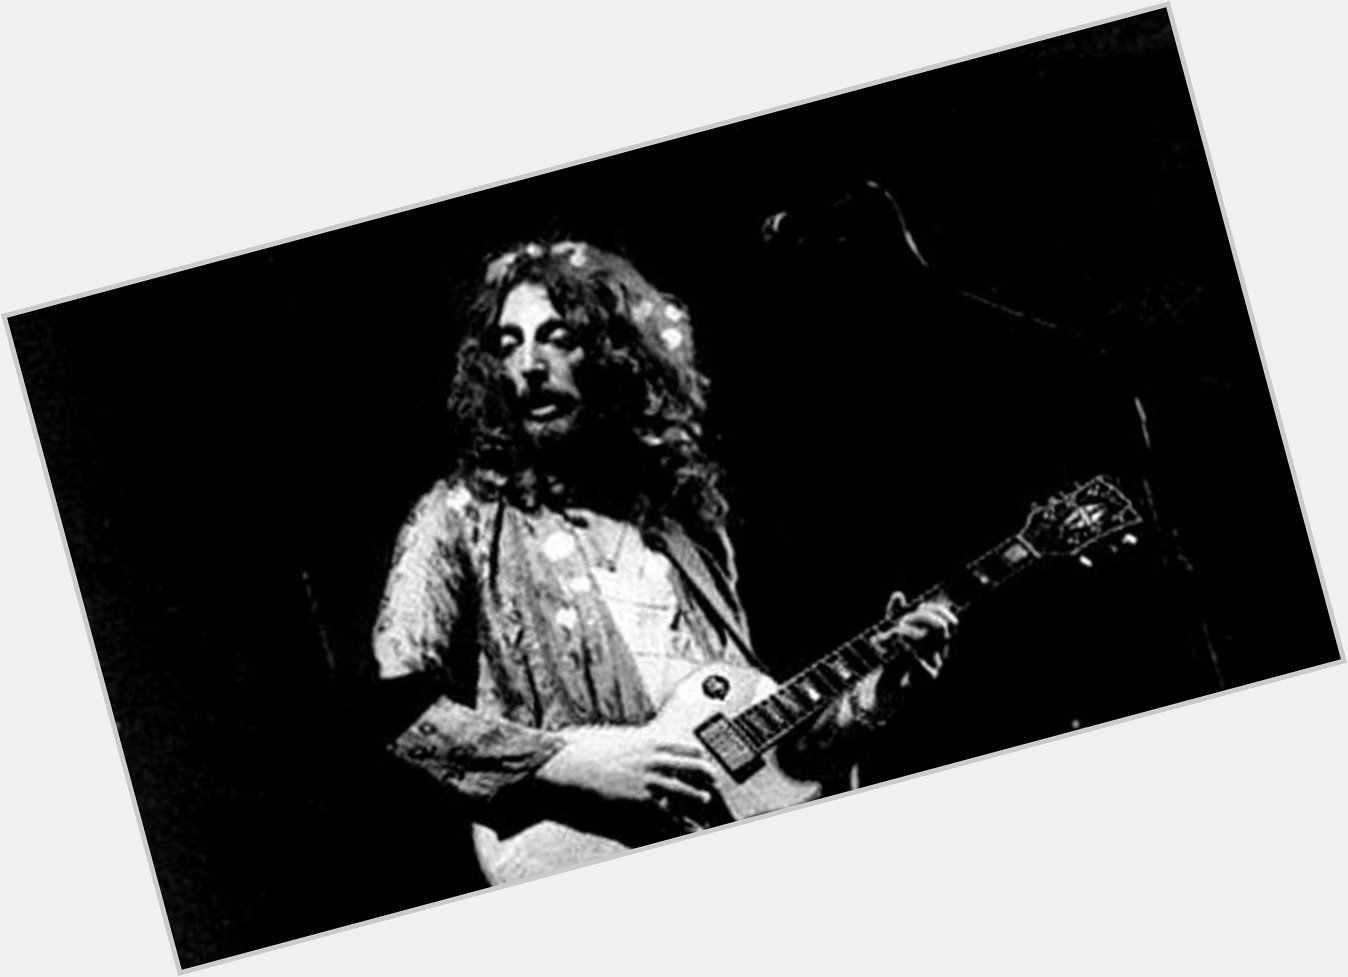 Happy birthday to Steve Hillage, who is 66 today! 